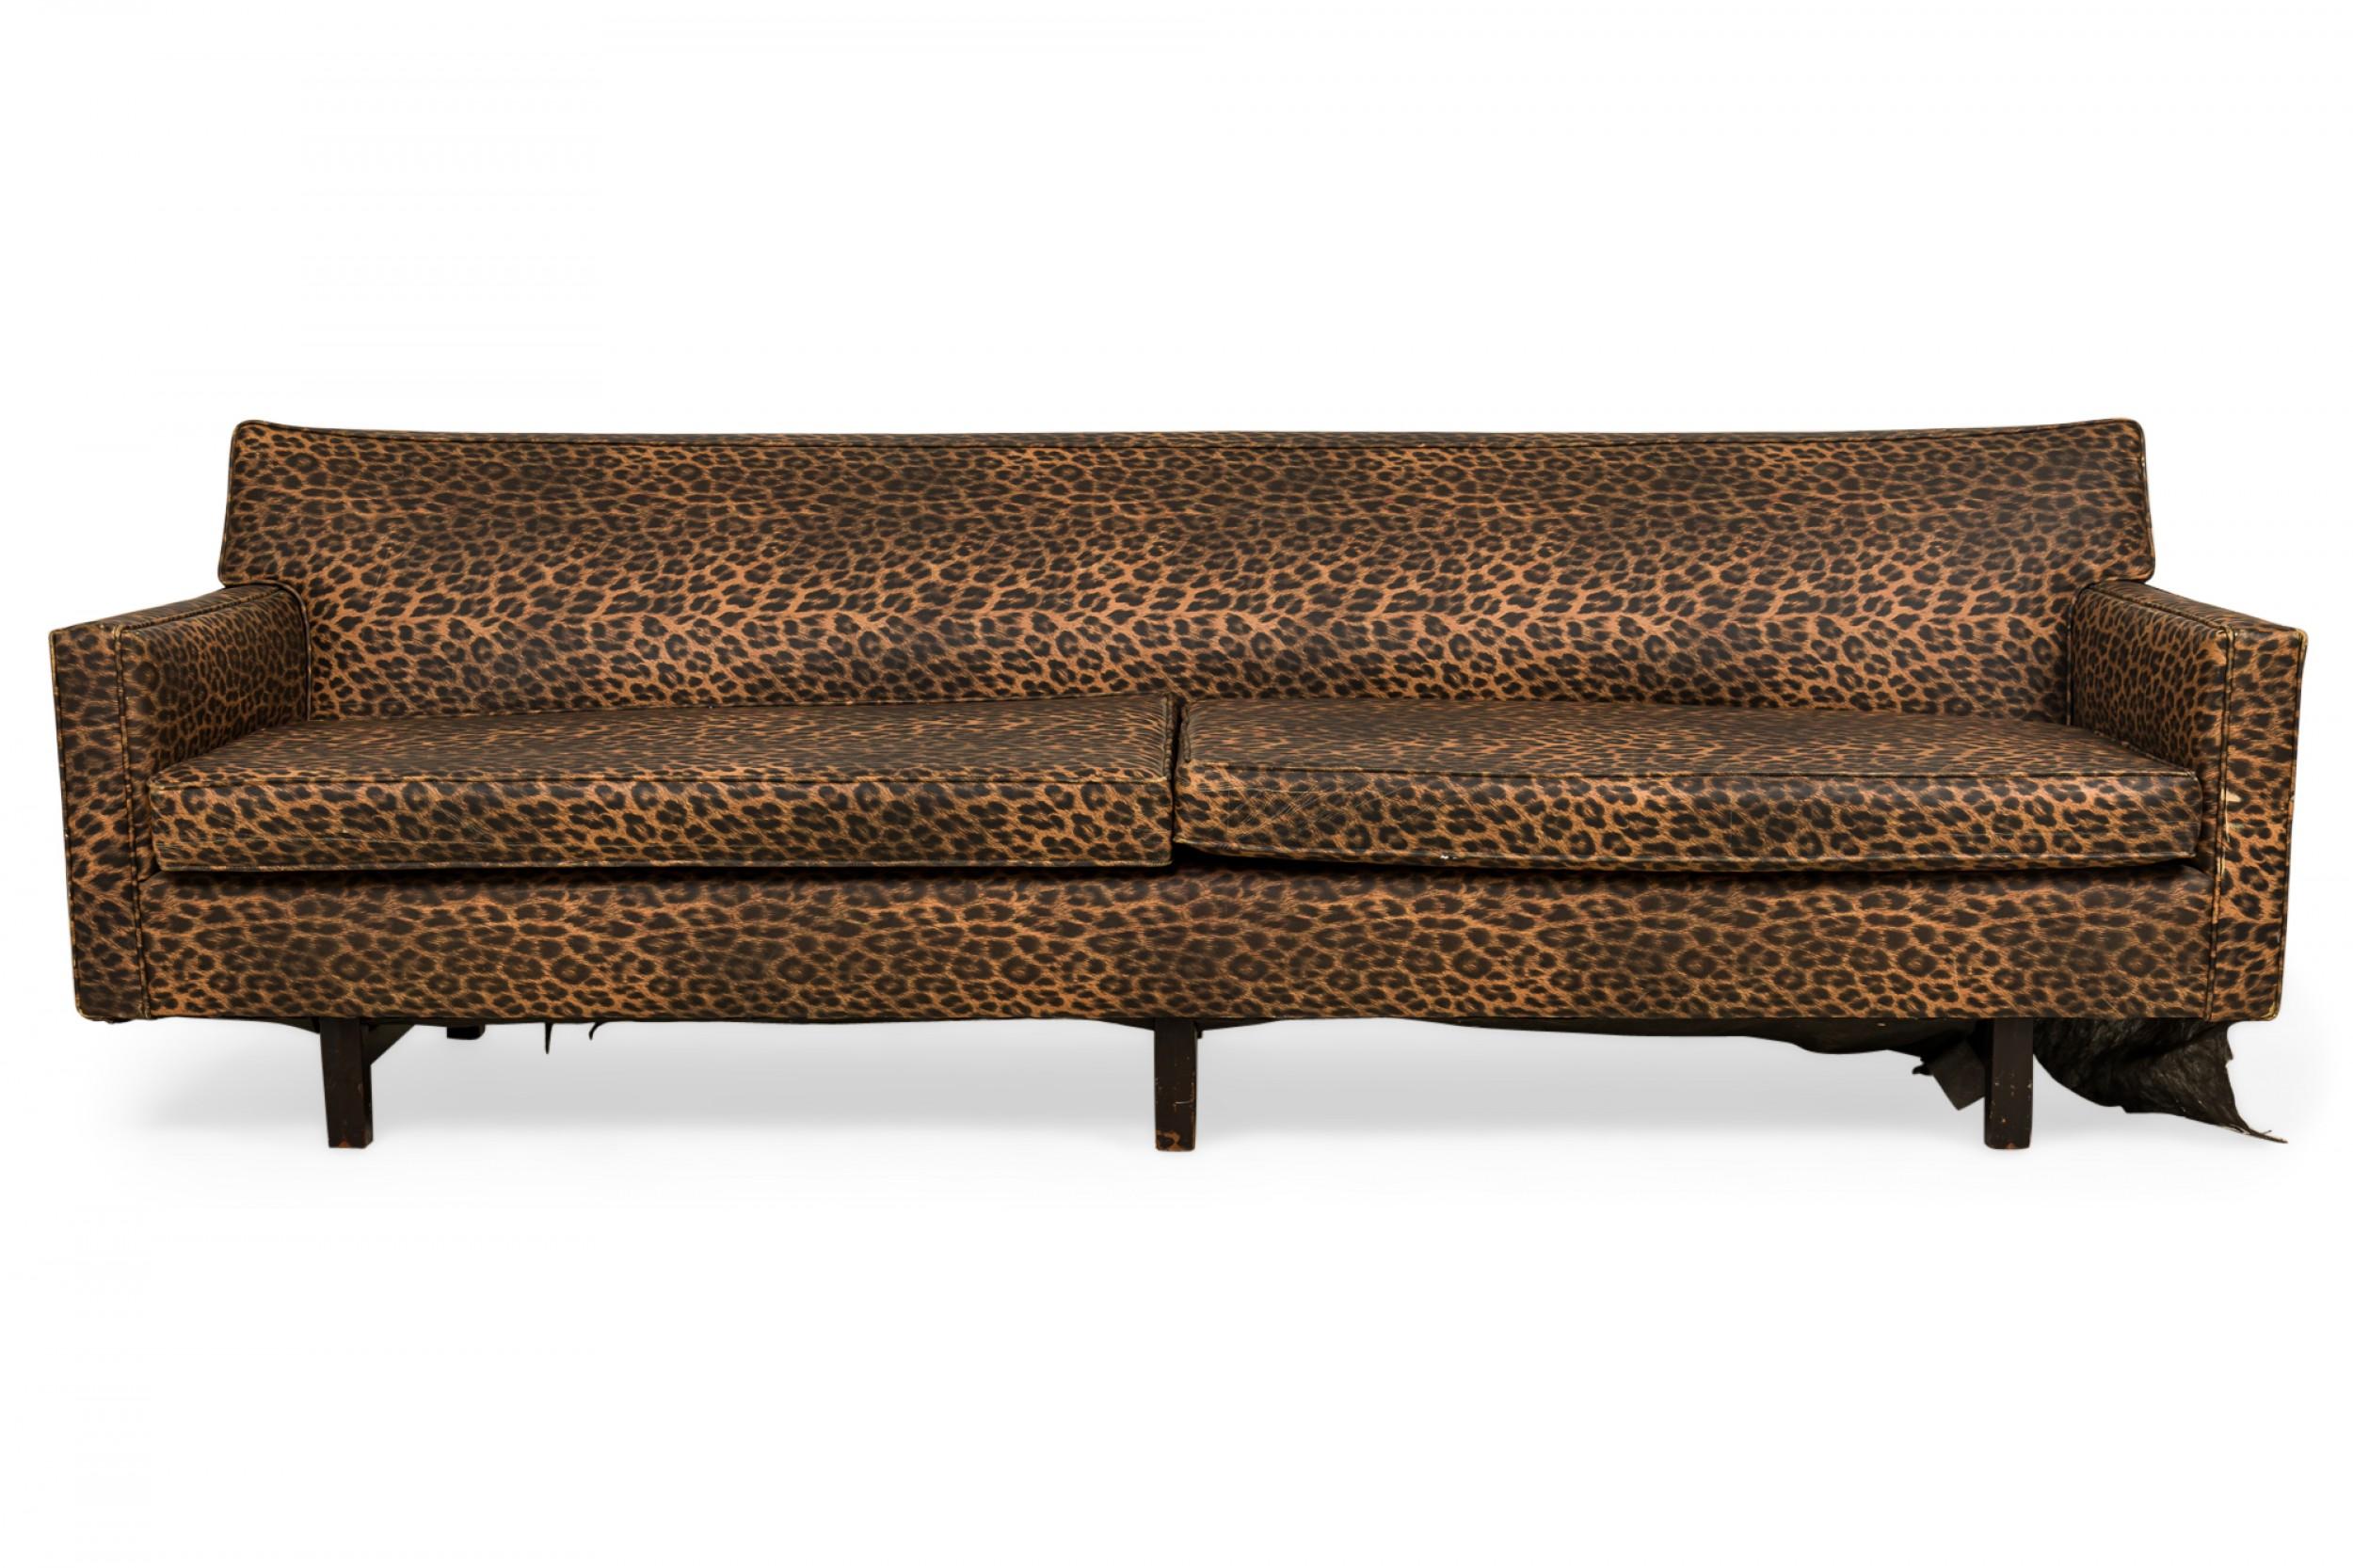 American Mid-Century three seat sofa, upholstered in a brown and black leopard print vinyl with two removable seat cushions, resting on three sets of square walnut legs. (EDWARD J WORMLEY FOR DUNBAR FURNITURE COMPANY).
 